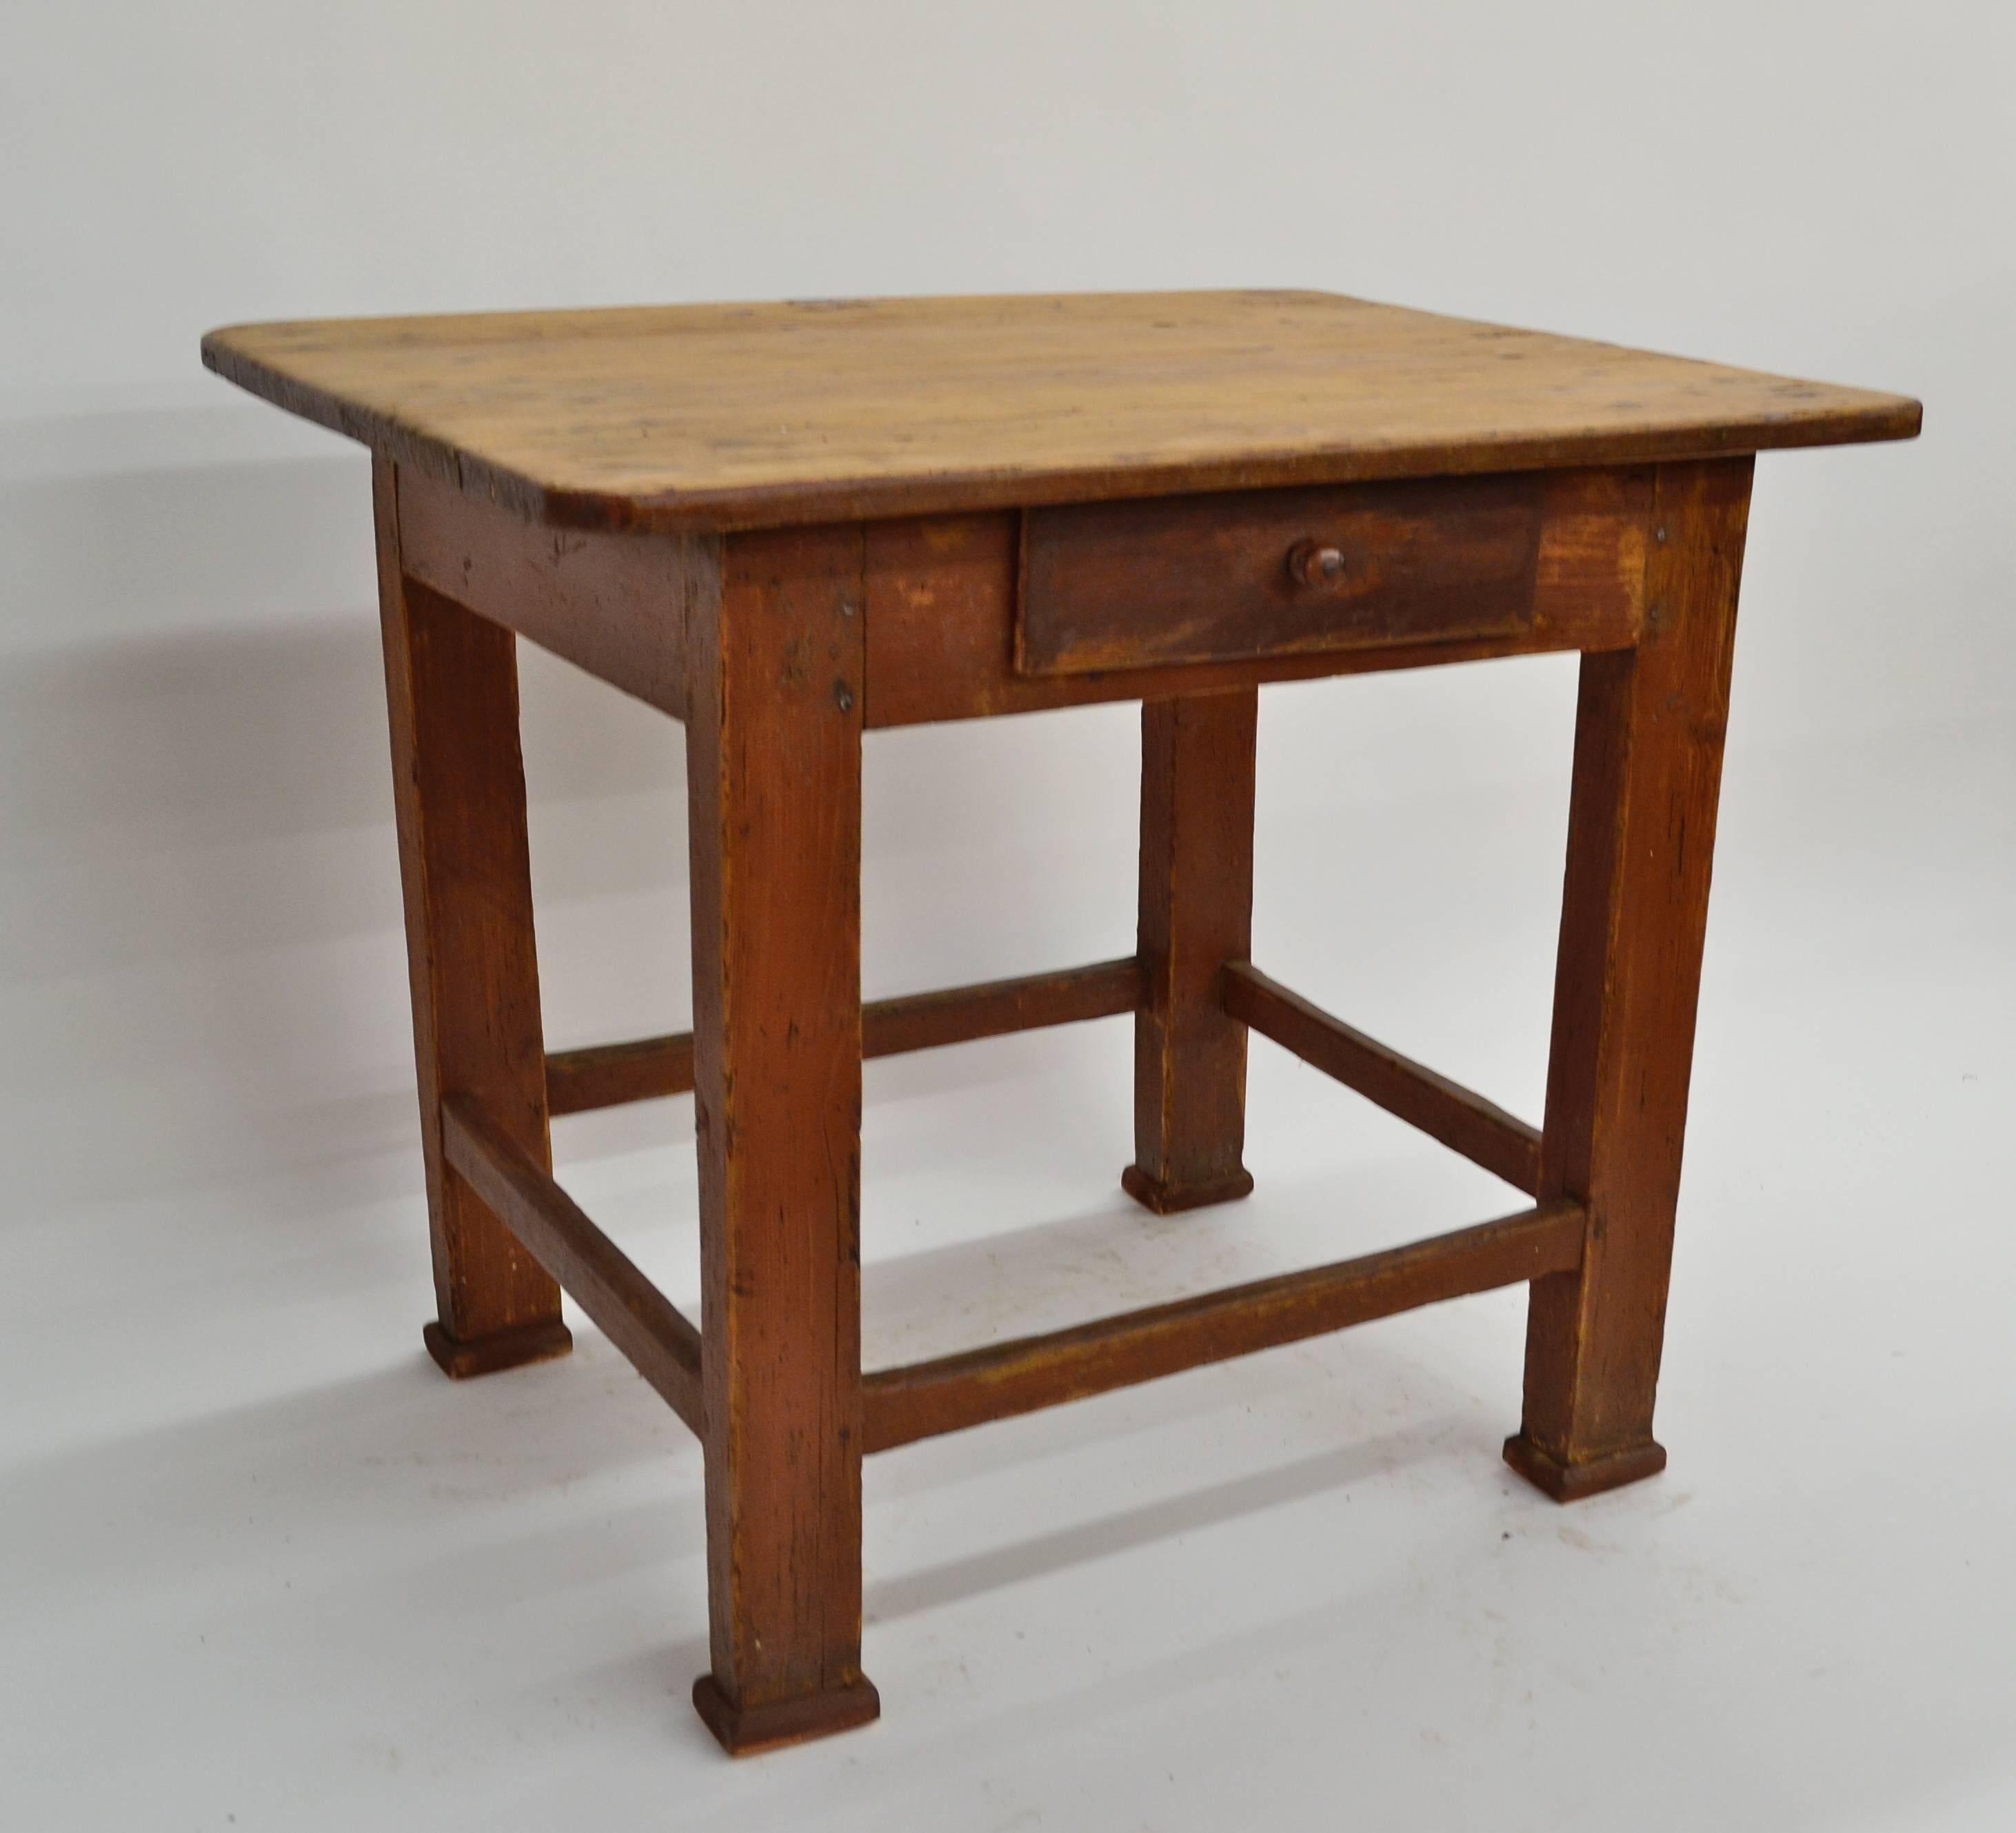 A beautifully worn one drawer pine end table featuring a naturally distressed three board top with smoothly rounded corners. The four straight legs are joined by four worn stretchers. The base is in original oxblood paint rubbed through to bare wood